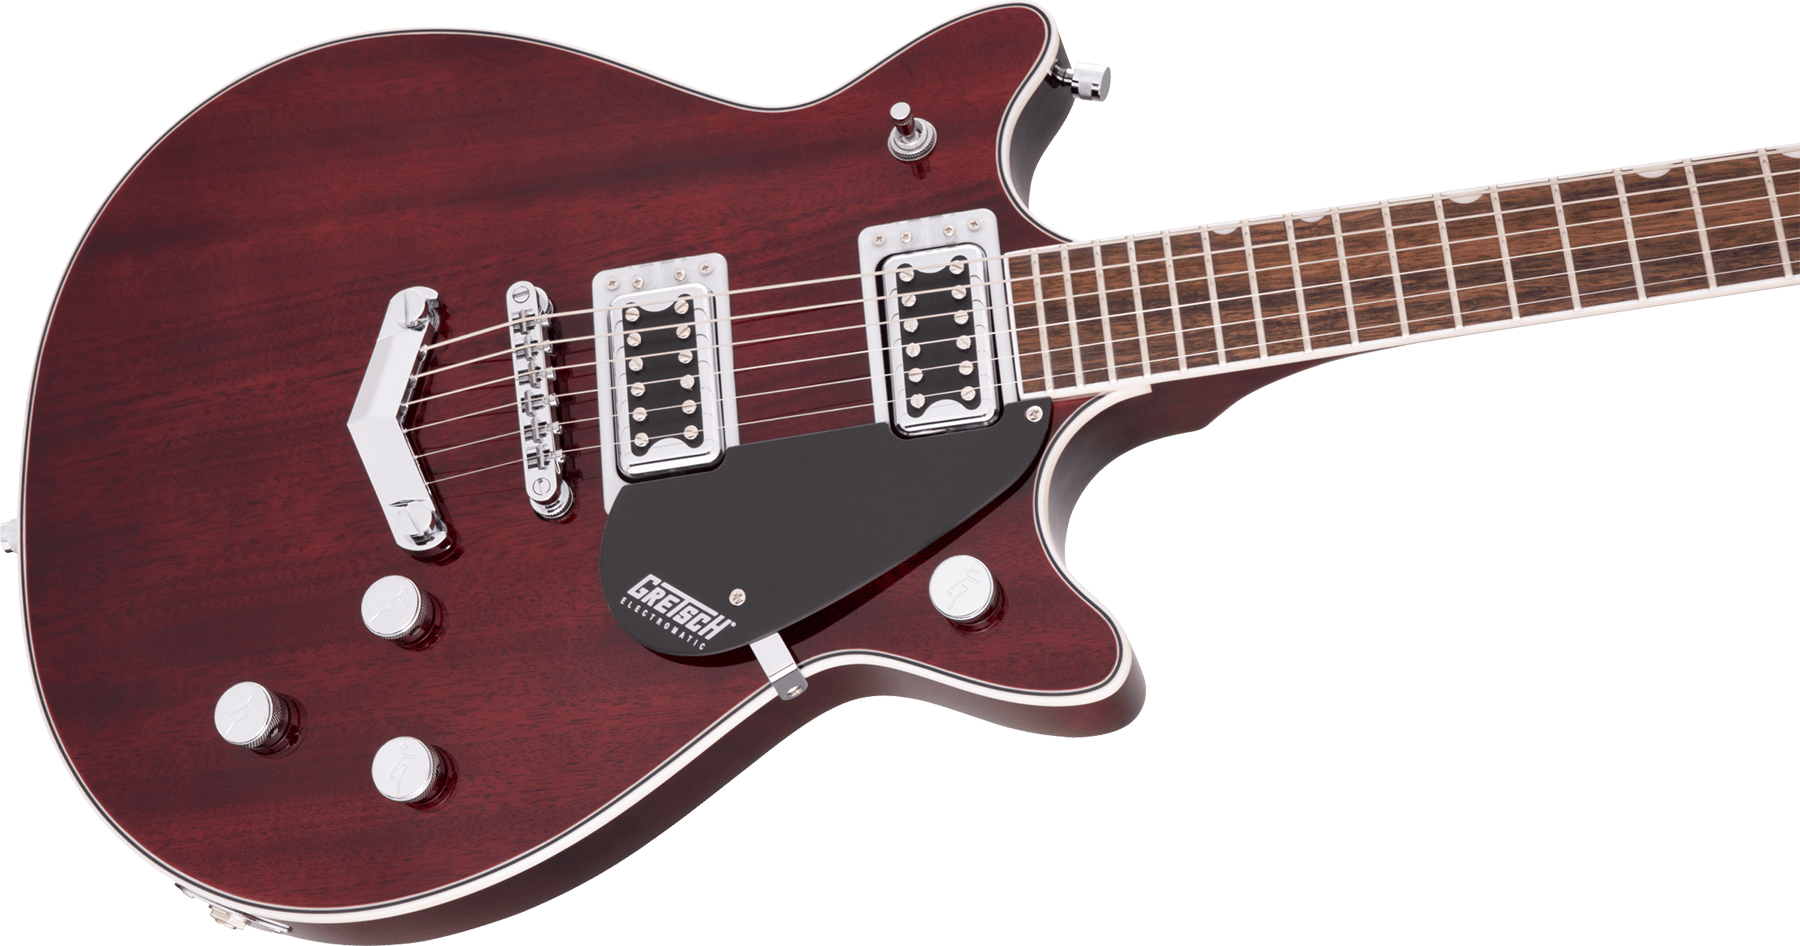 Gretsch G5222 Electromatic Double Jet Bt V-stoptail Hh Ht Lau - Walnut Stain - Double cut electric guitar - Variation 2